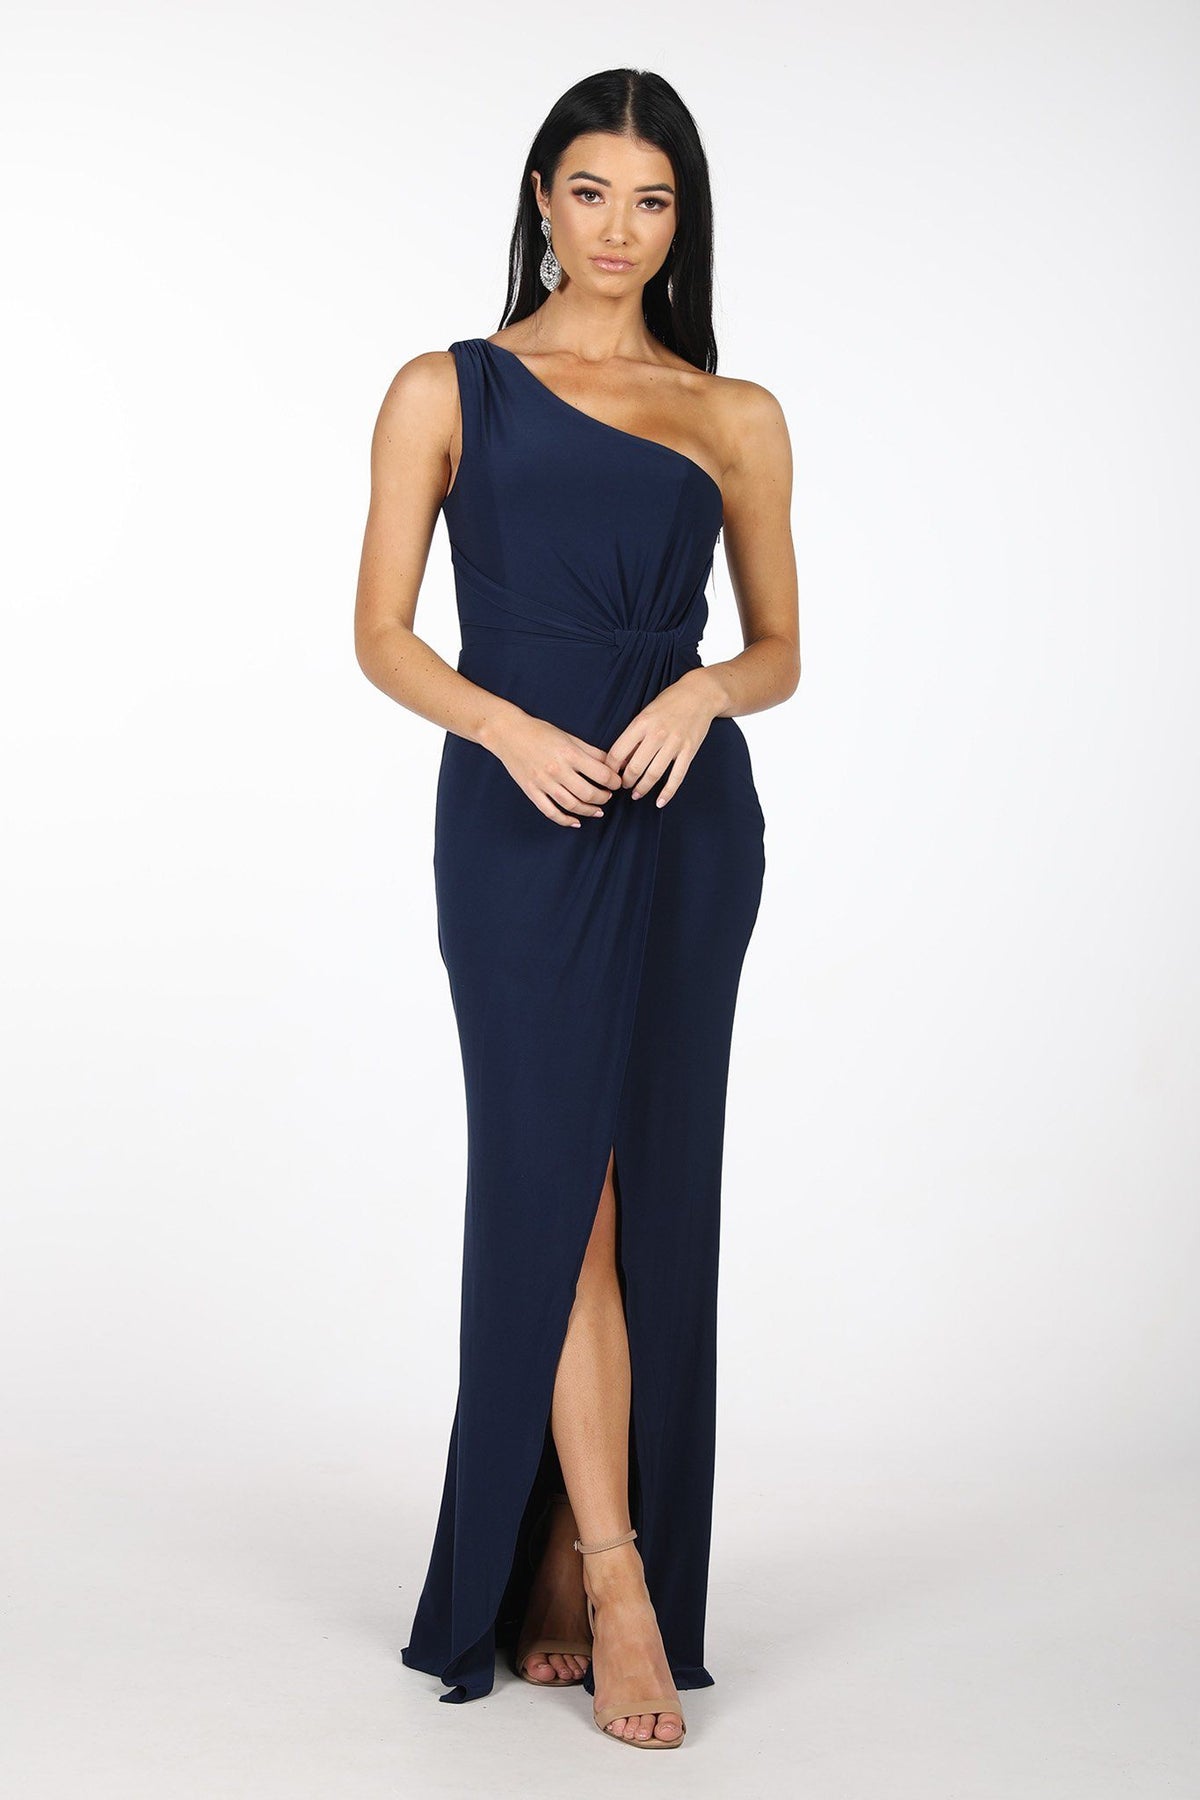 Maxi-Length Dress with Asymmetrical One Shoulder Neckline, Ruched Waist, Above Knee High Slit, and a Column Styled Silhouette in Navy Colour